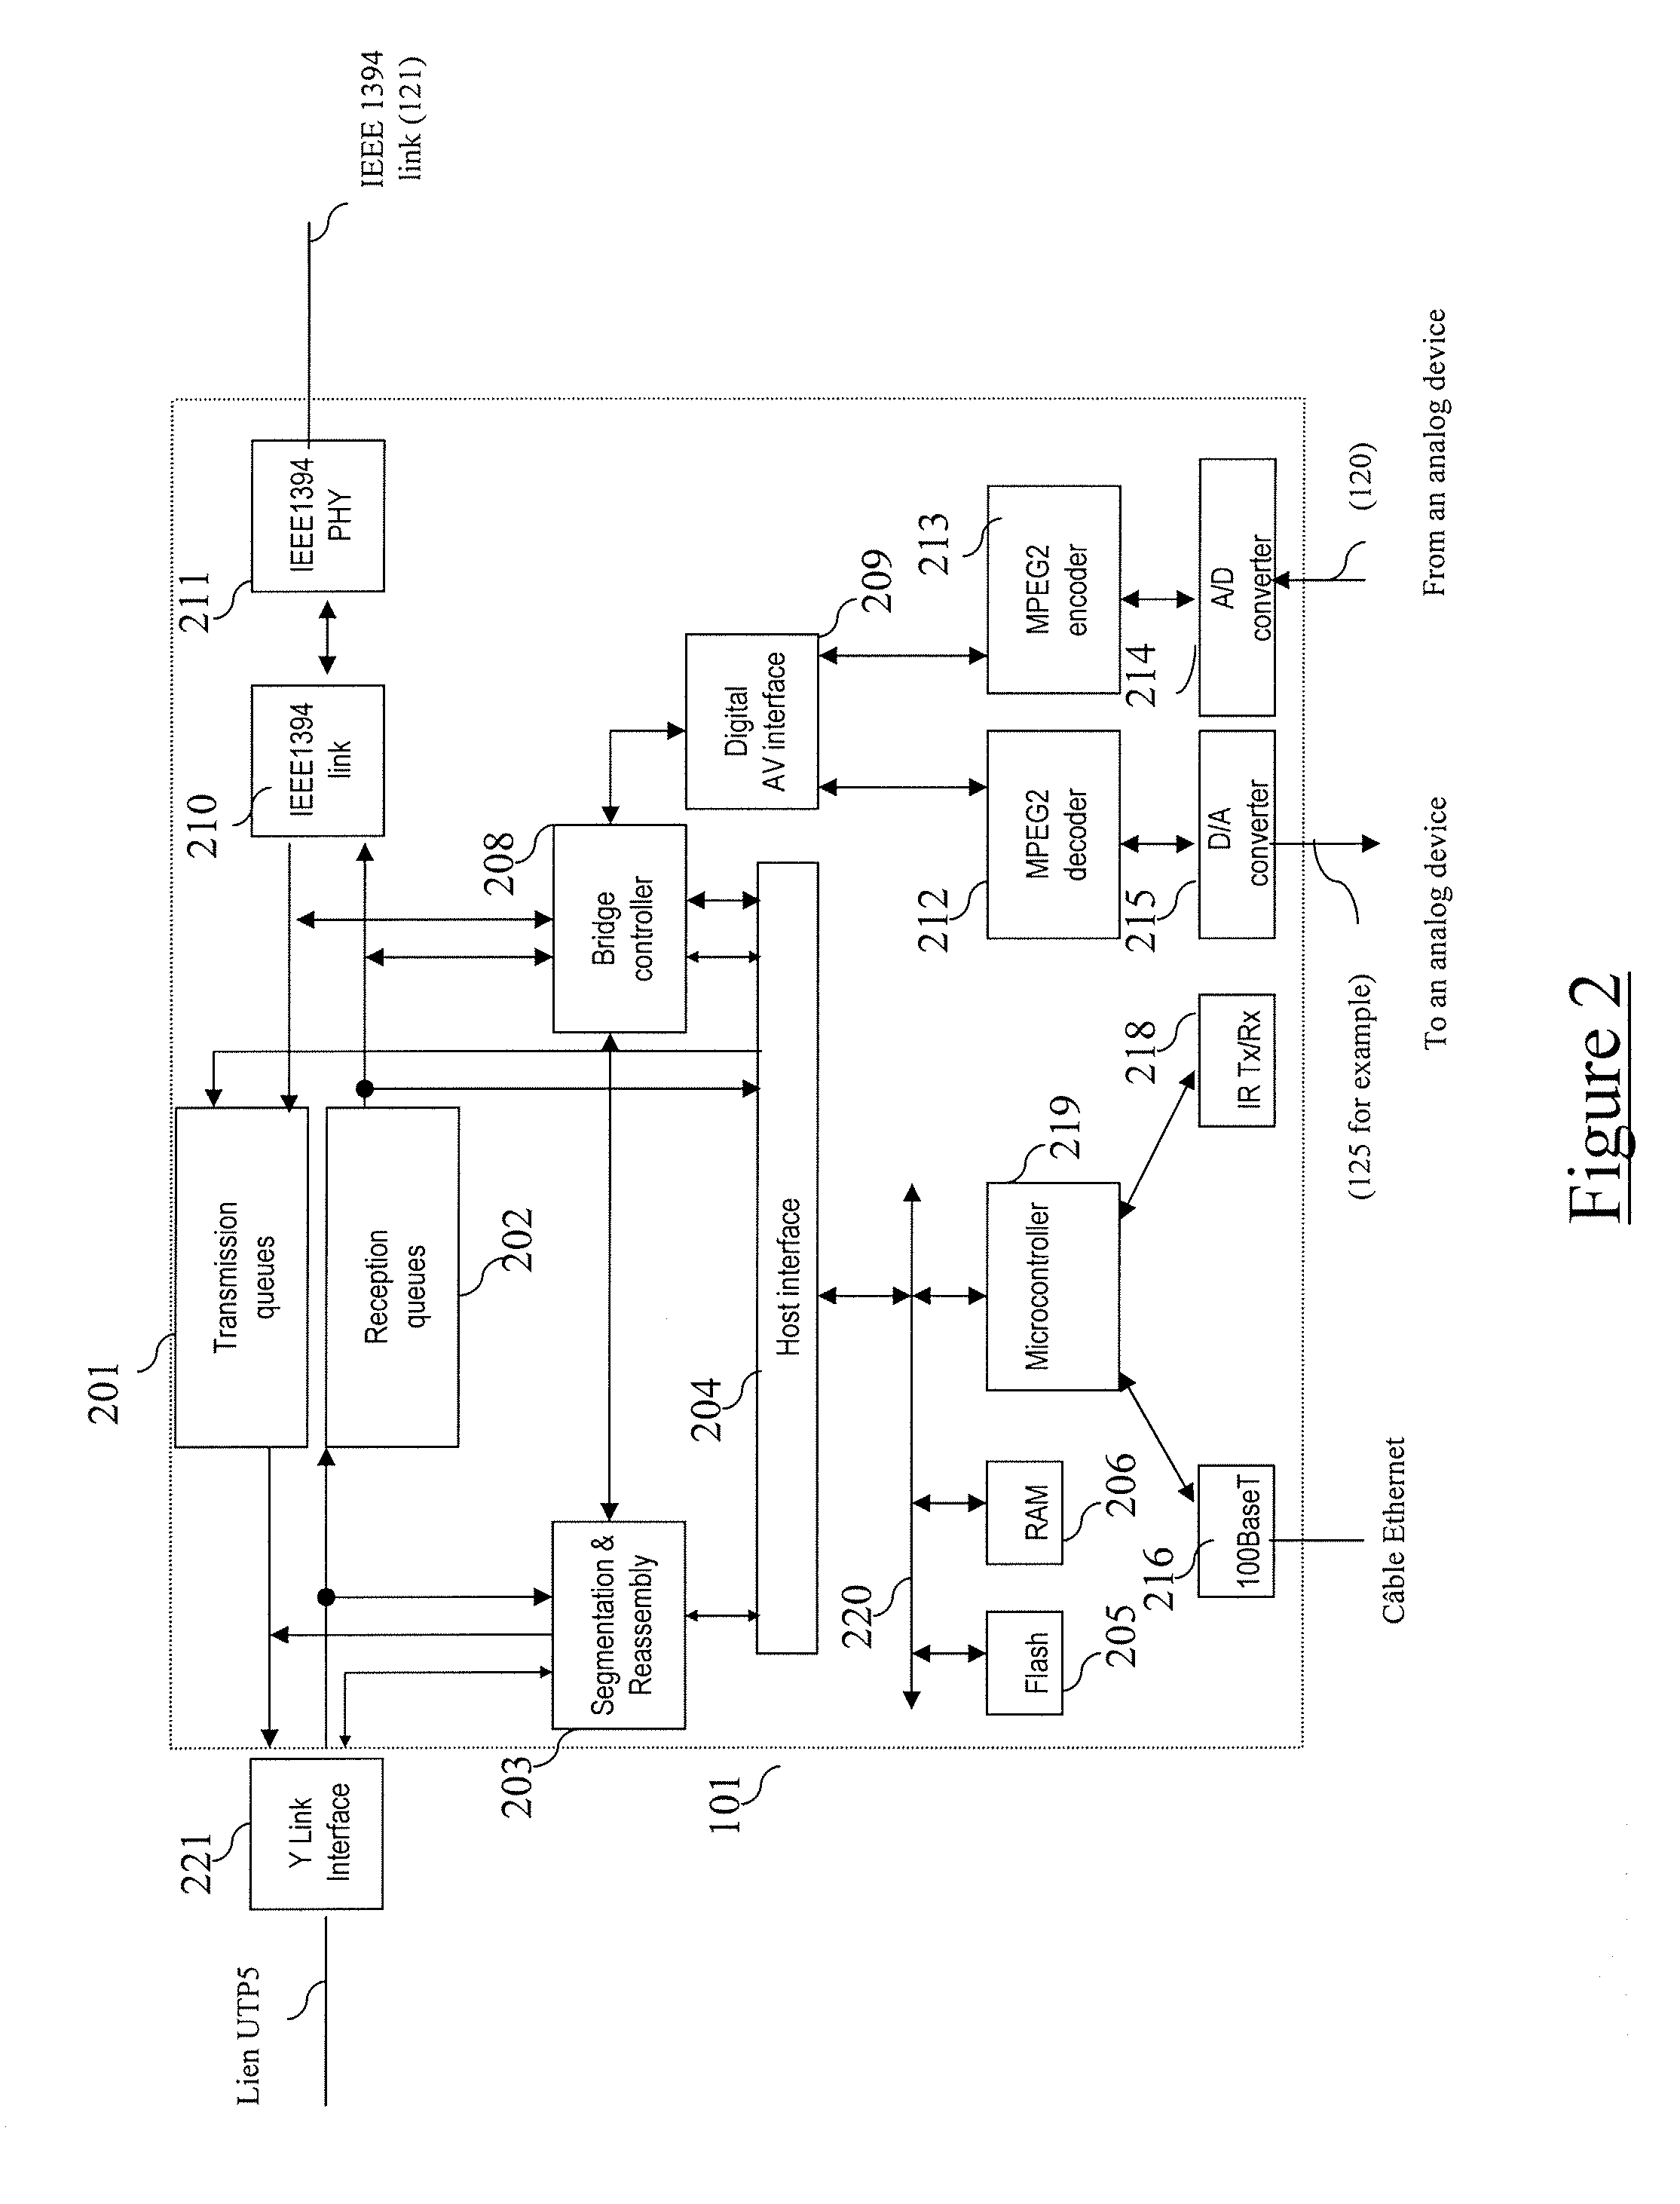 Method For The Management Of Access To At Least One Content And/Or At Least One Service, Corresponding Computer Program Product, Storage Means And Access Device